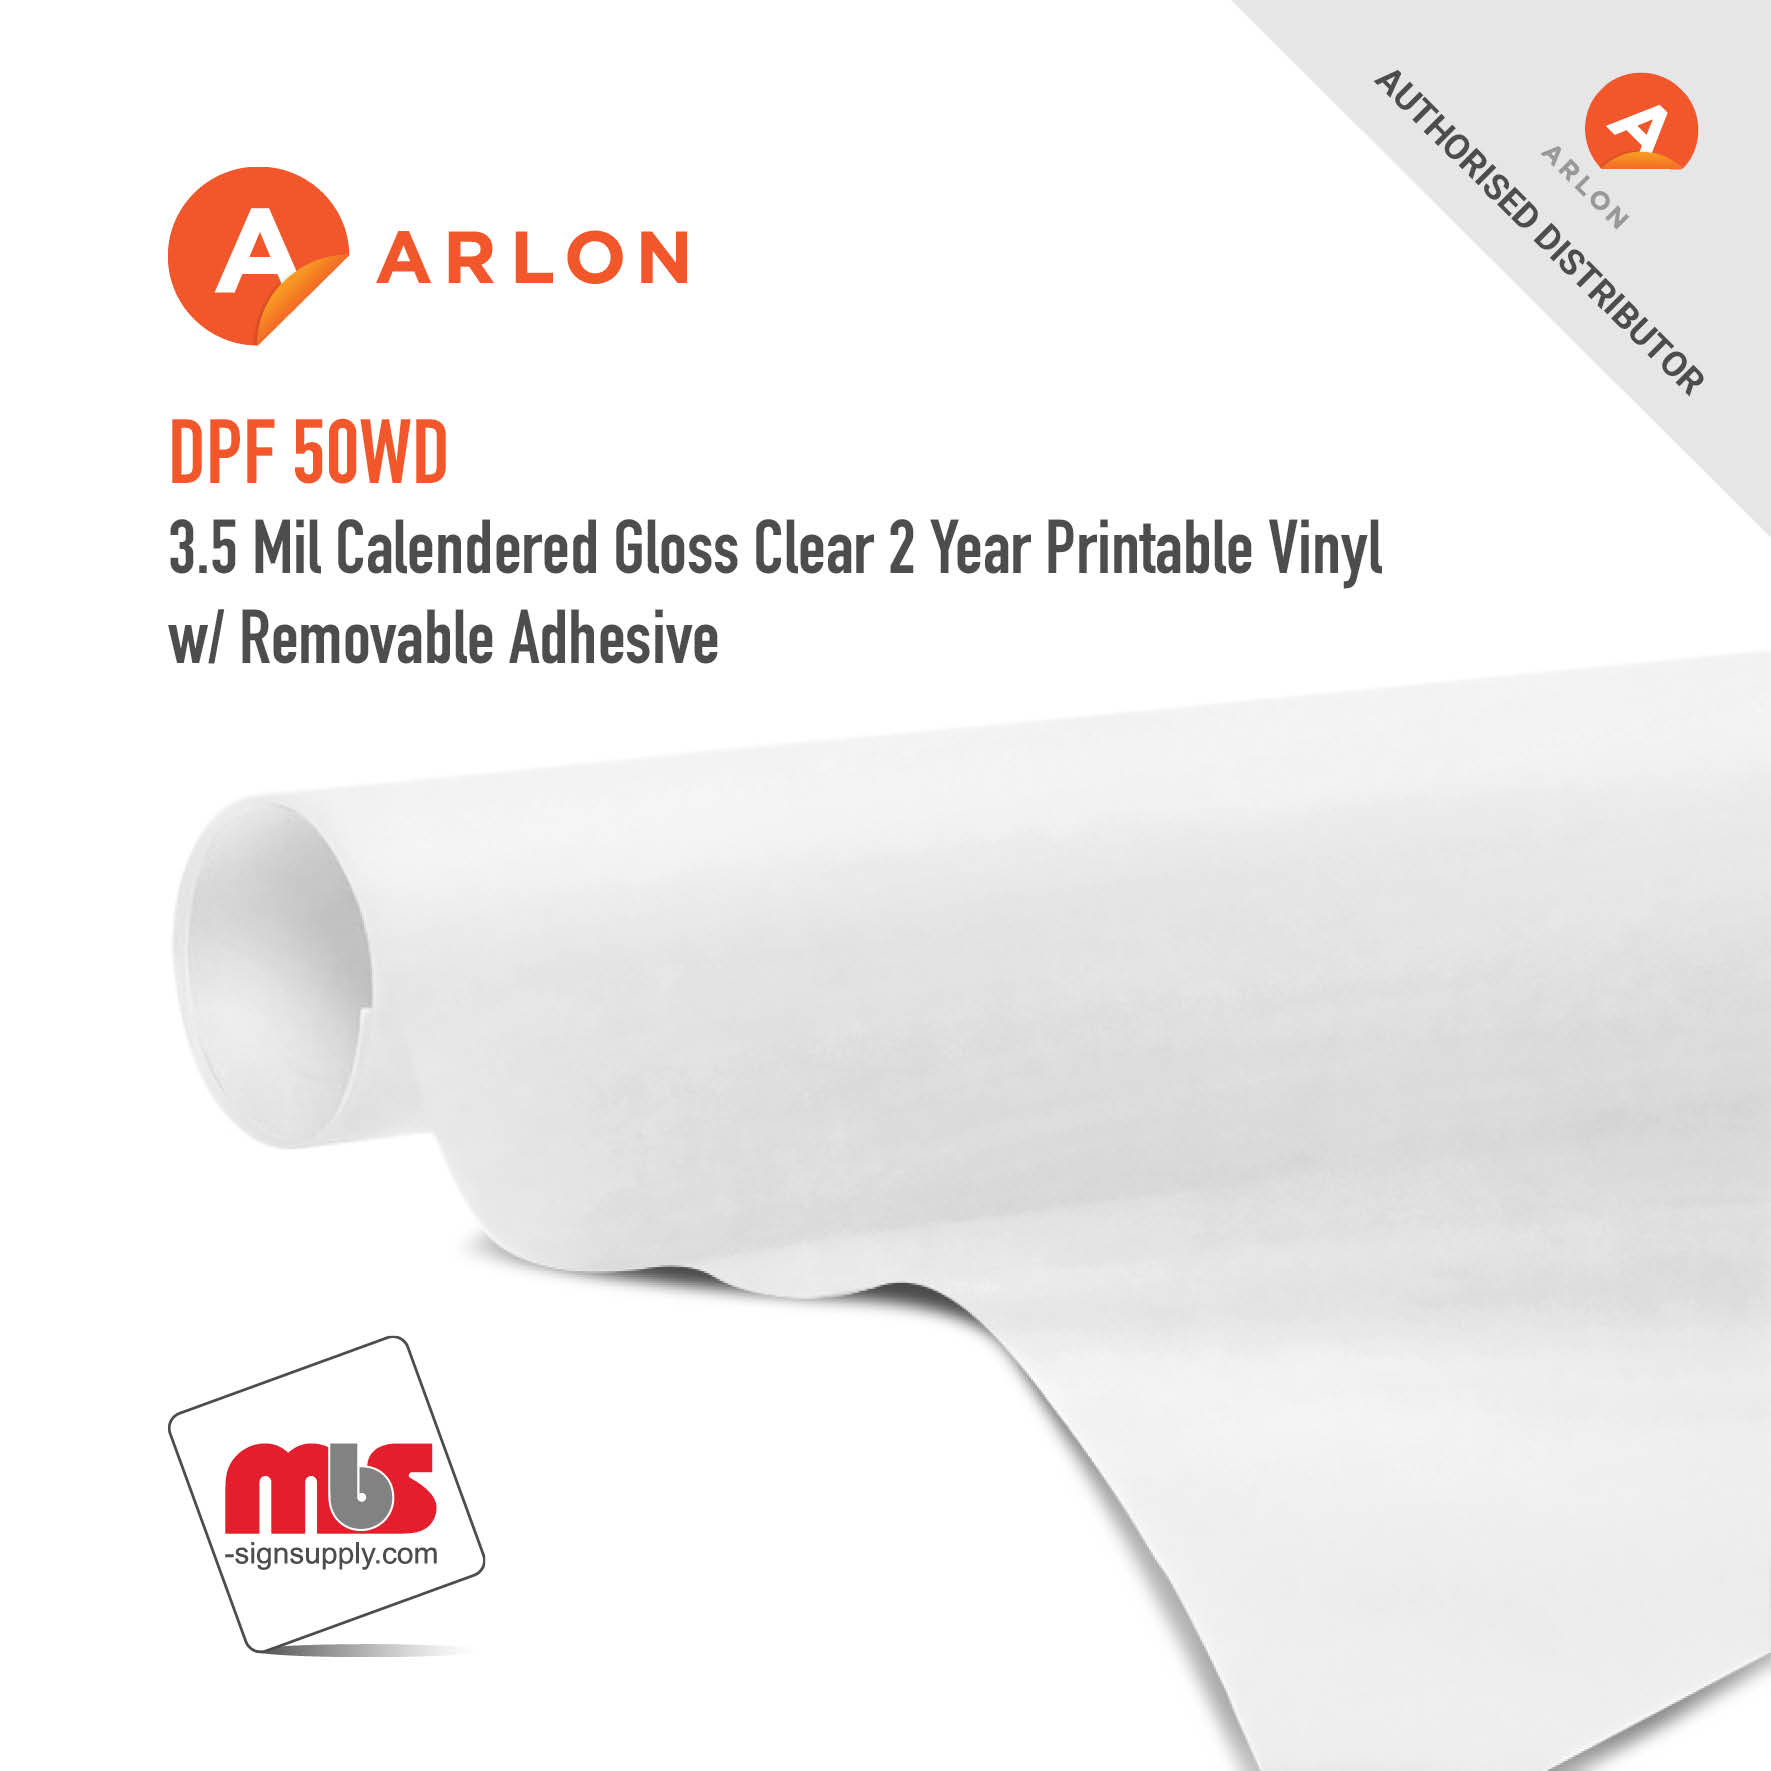 54'' x 50 Yard Roll - Arlon DPF 50WD 3.5 Mil Calendered Matte White 2 Year Printable Vinyl w/ Removable Adhesive